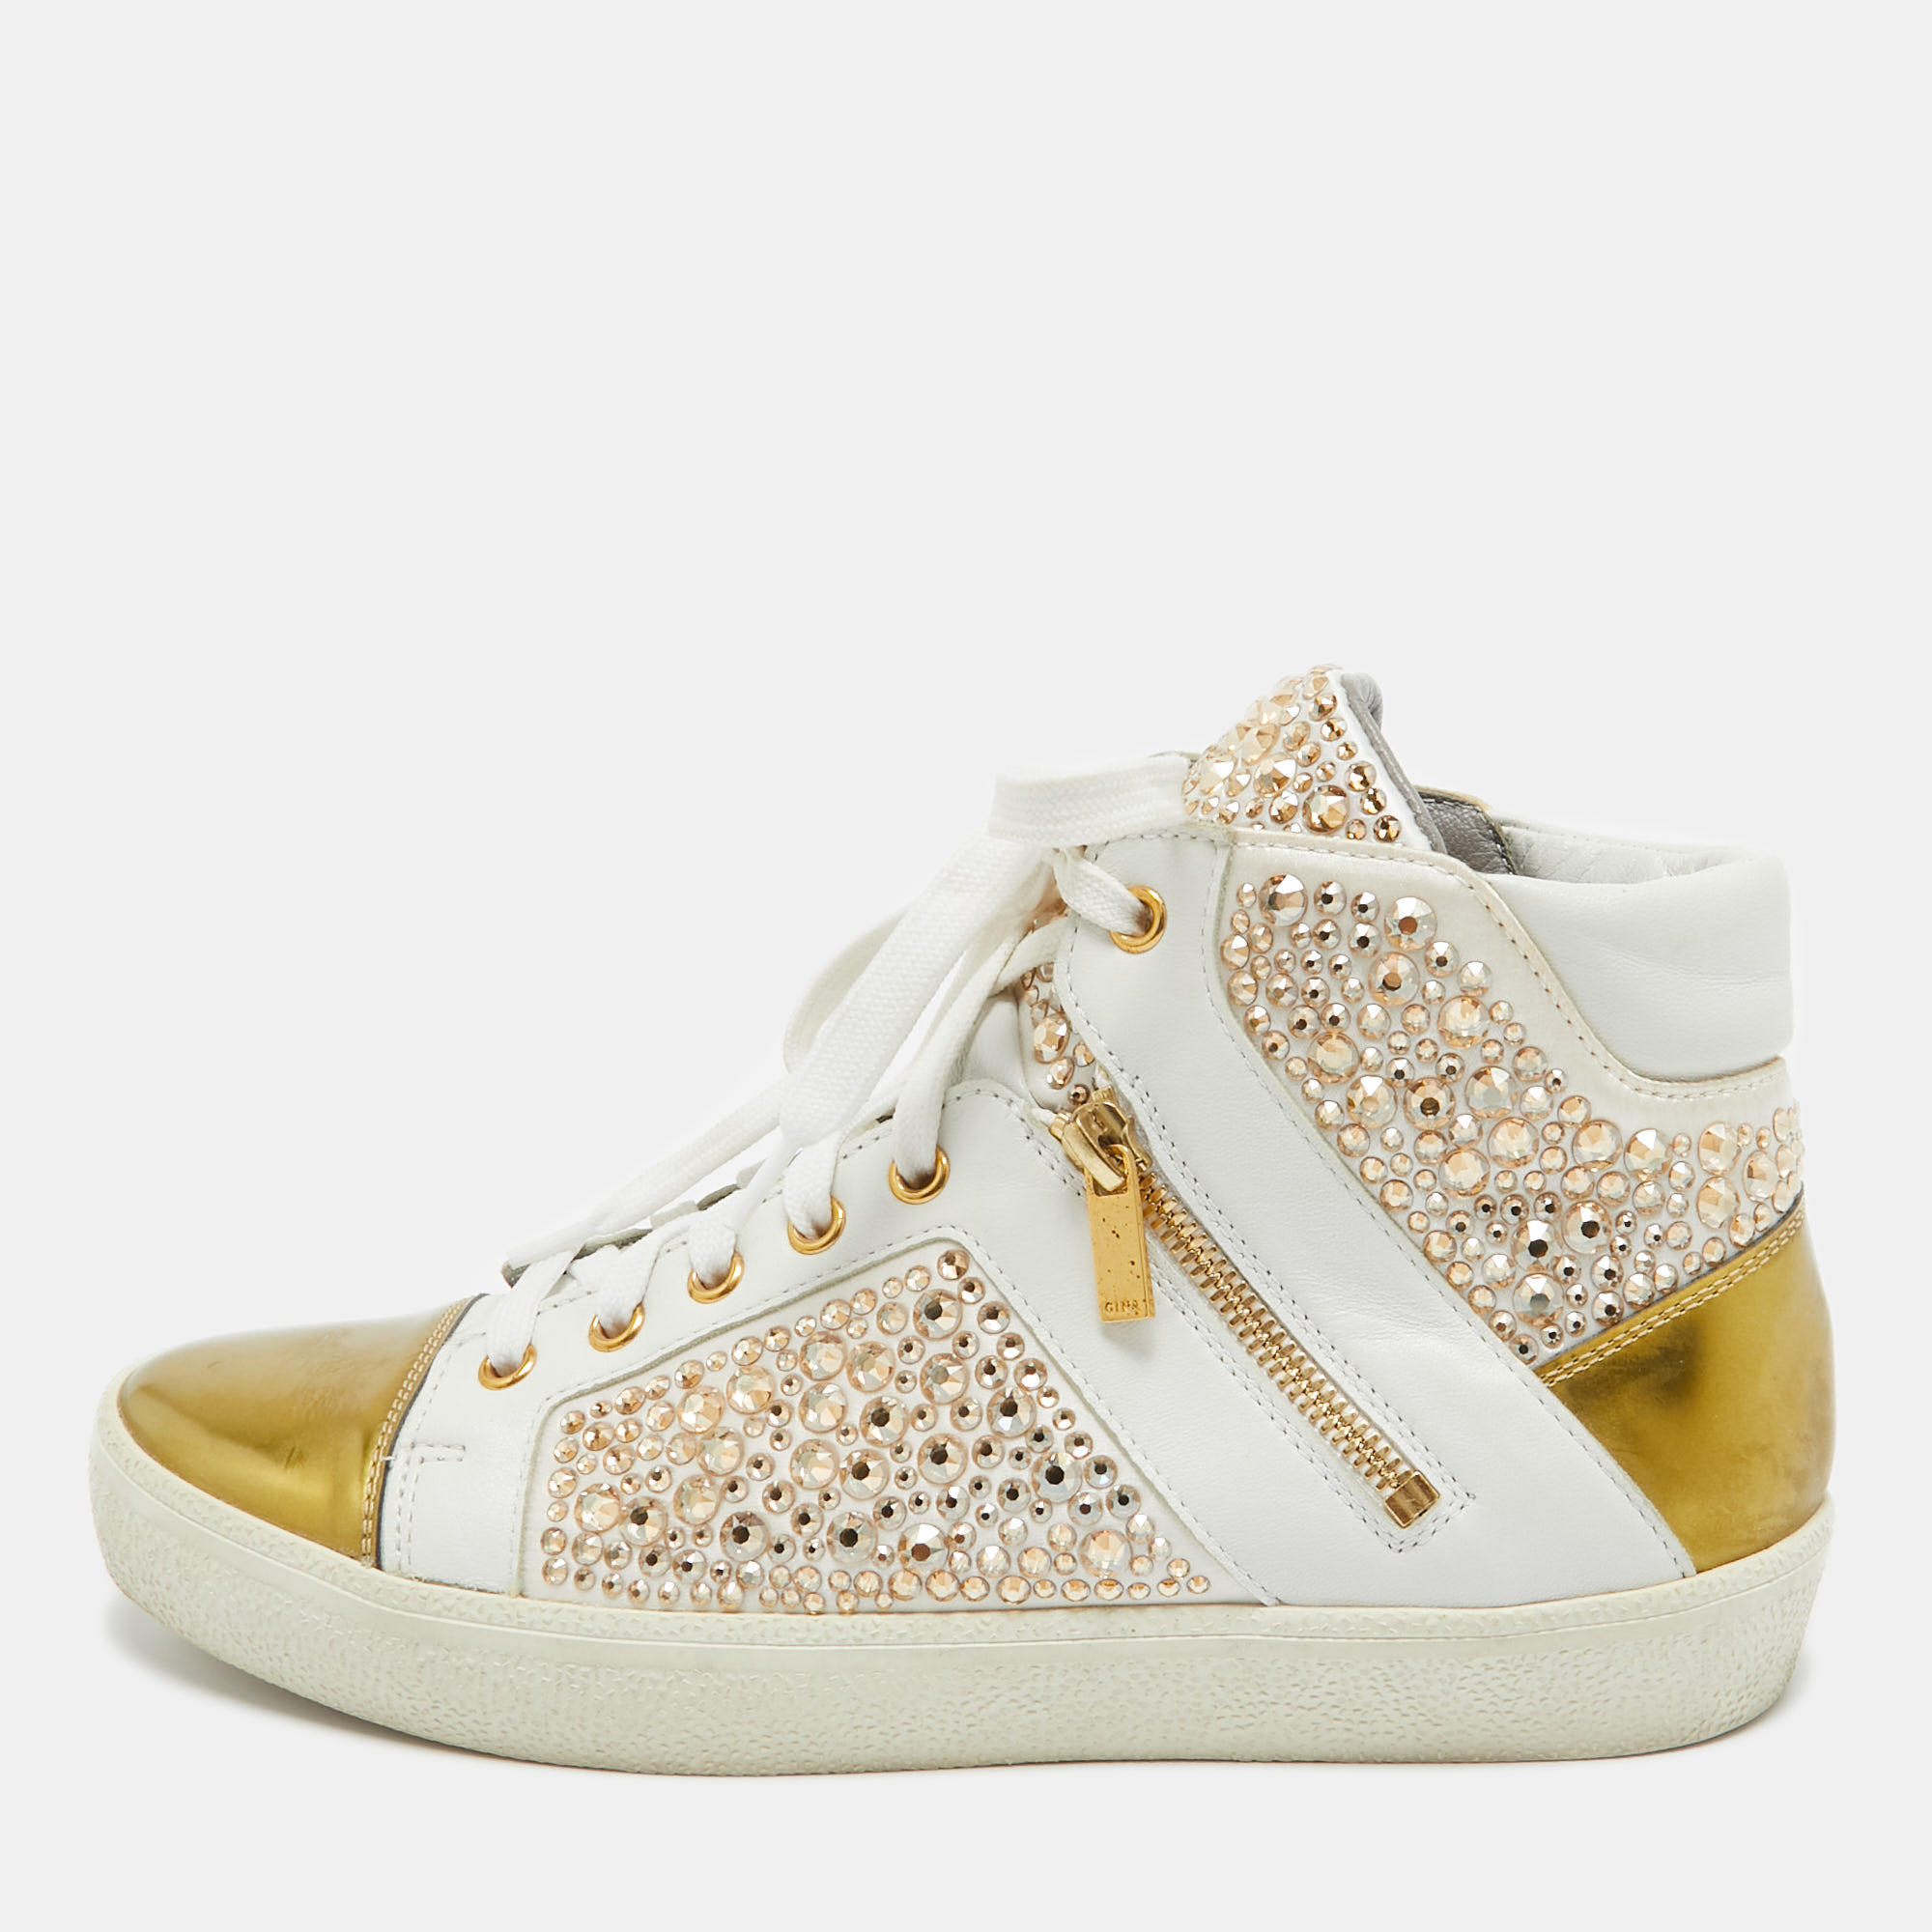 A little bit of flash could be truly modish and so are these high top sneakers by Gina. These have been crafted in white leather with golden trims and feature strass embellishment in gold tone all over. Insoles are leather lined.